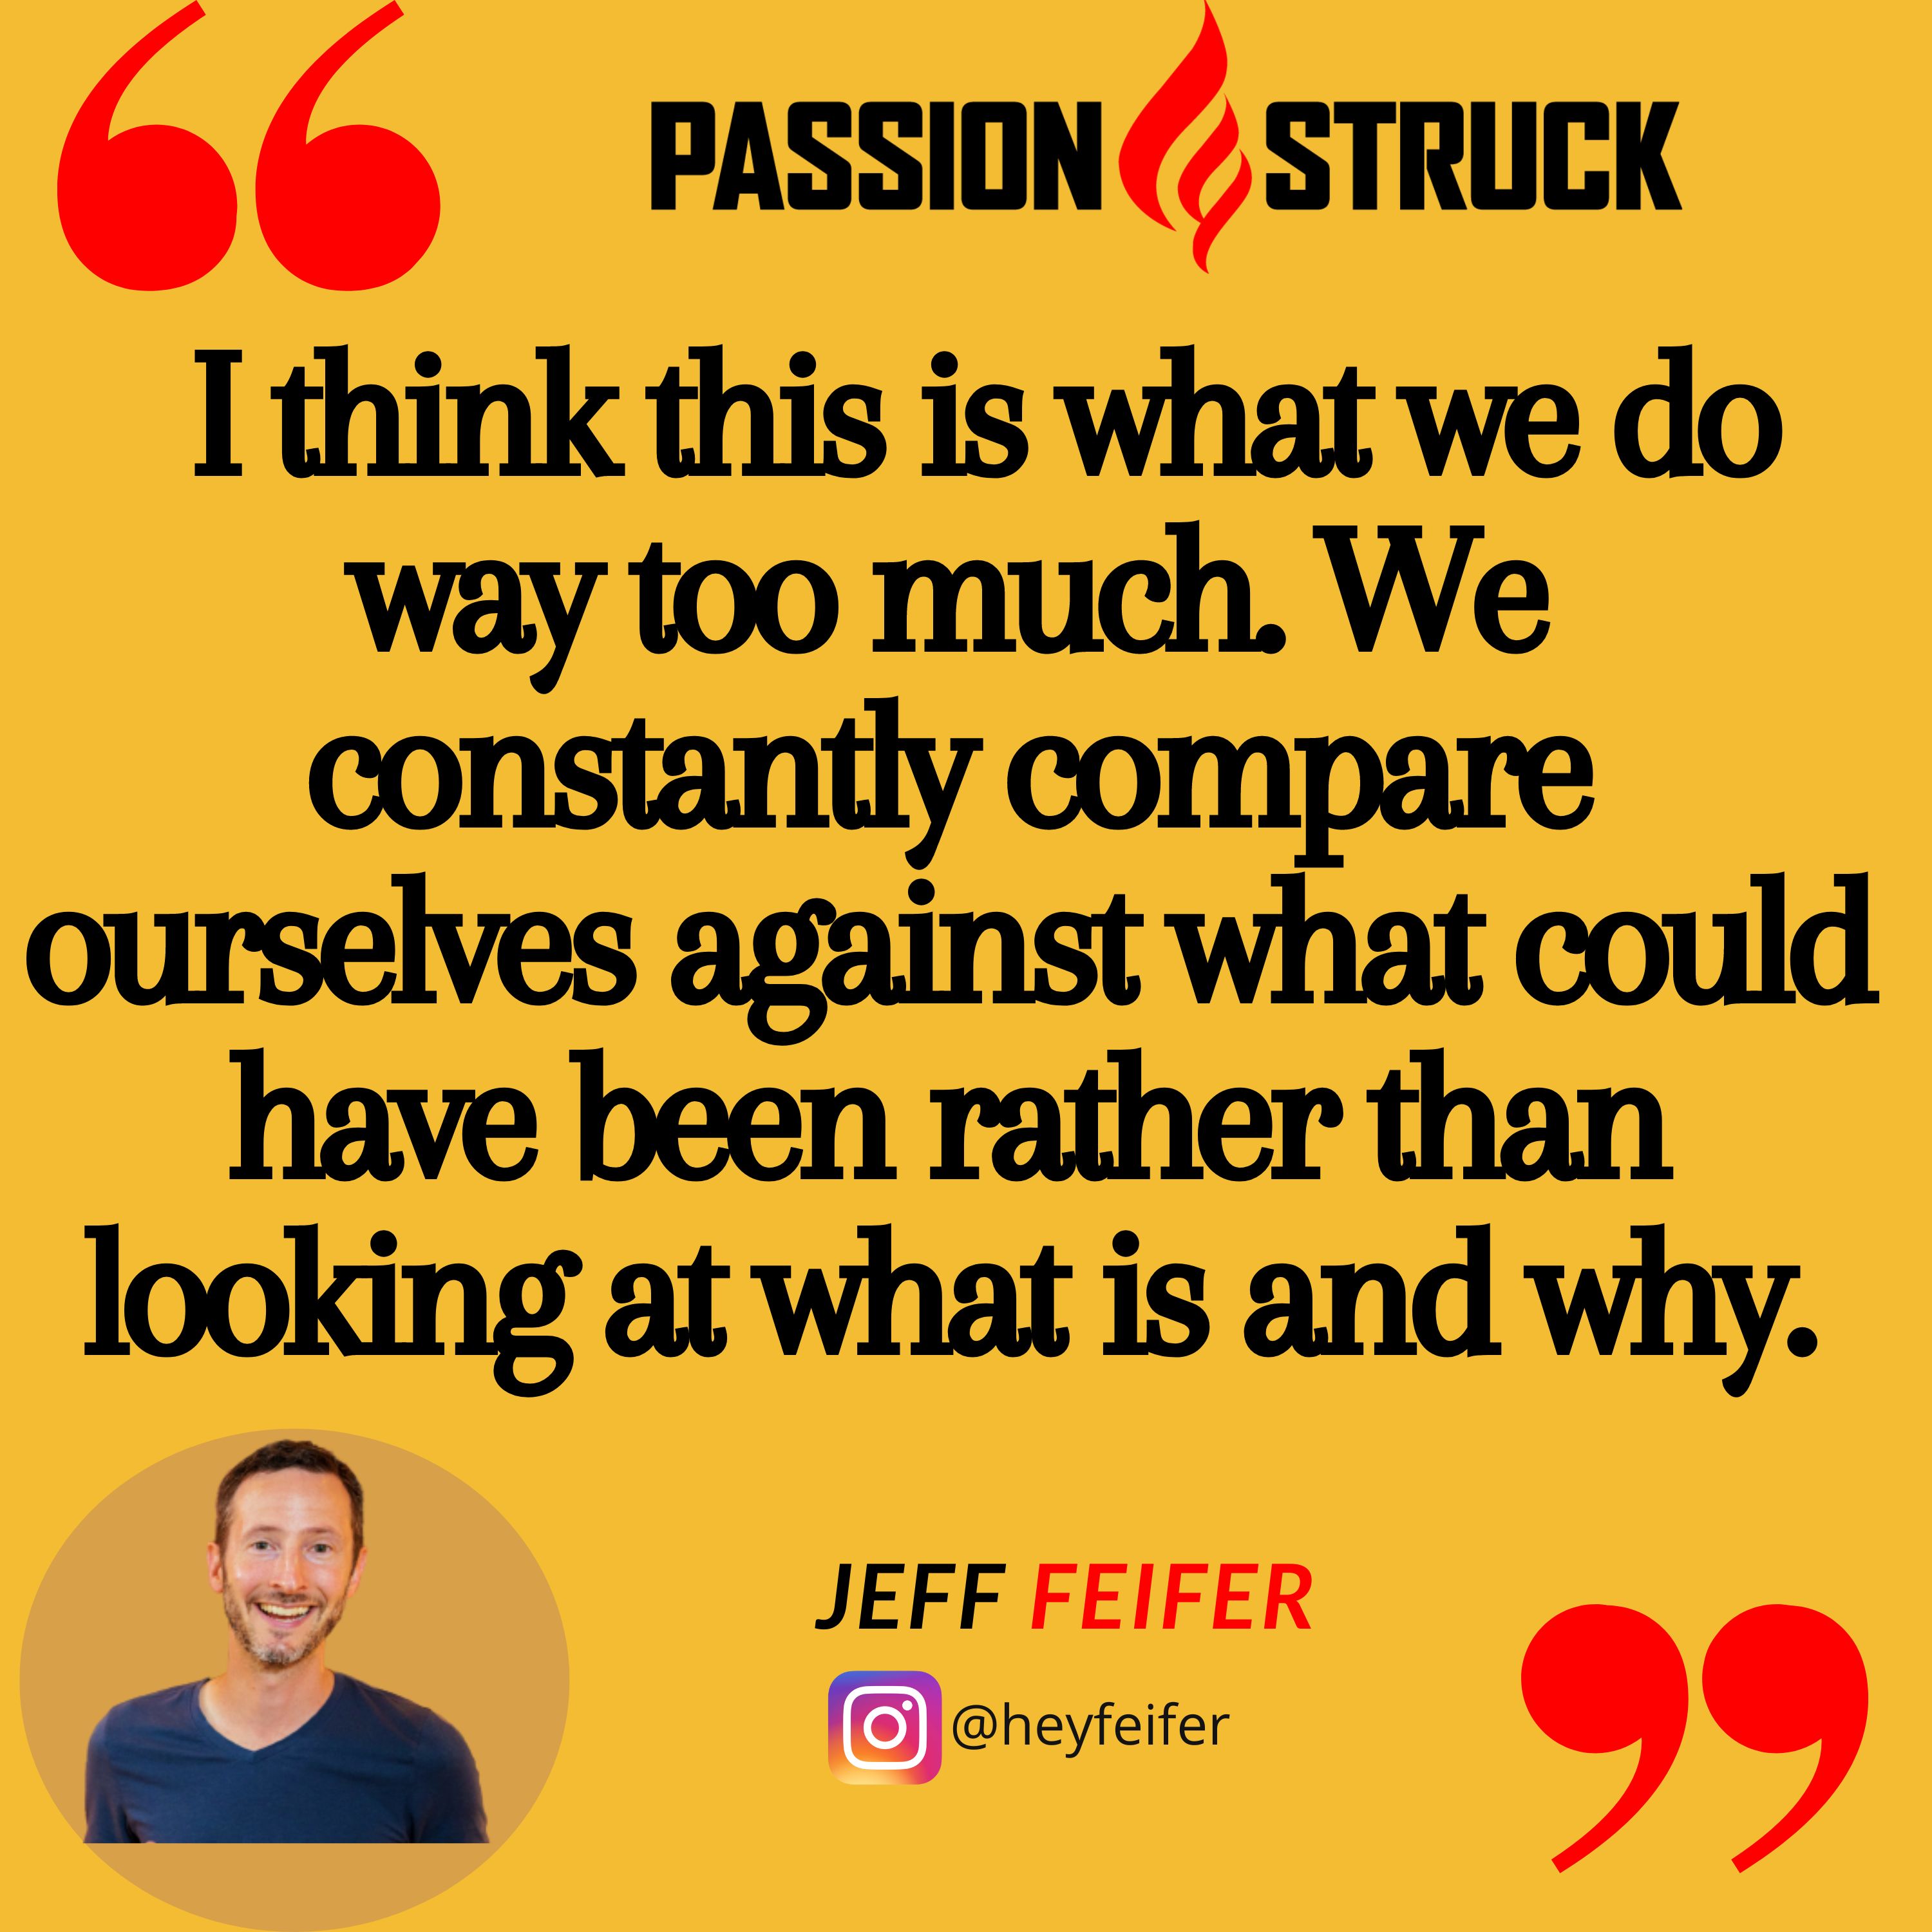 Jason Feifer quote from the Passion Struck podcast: I think this is what we do way too much. We constantly compare ourselves against what could have been rather than looking at what is and why